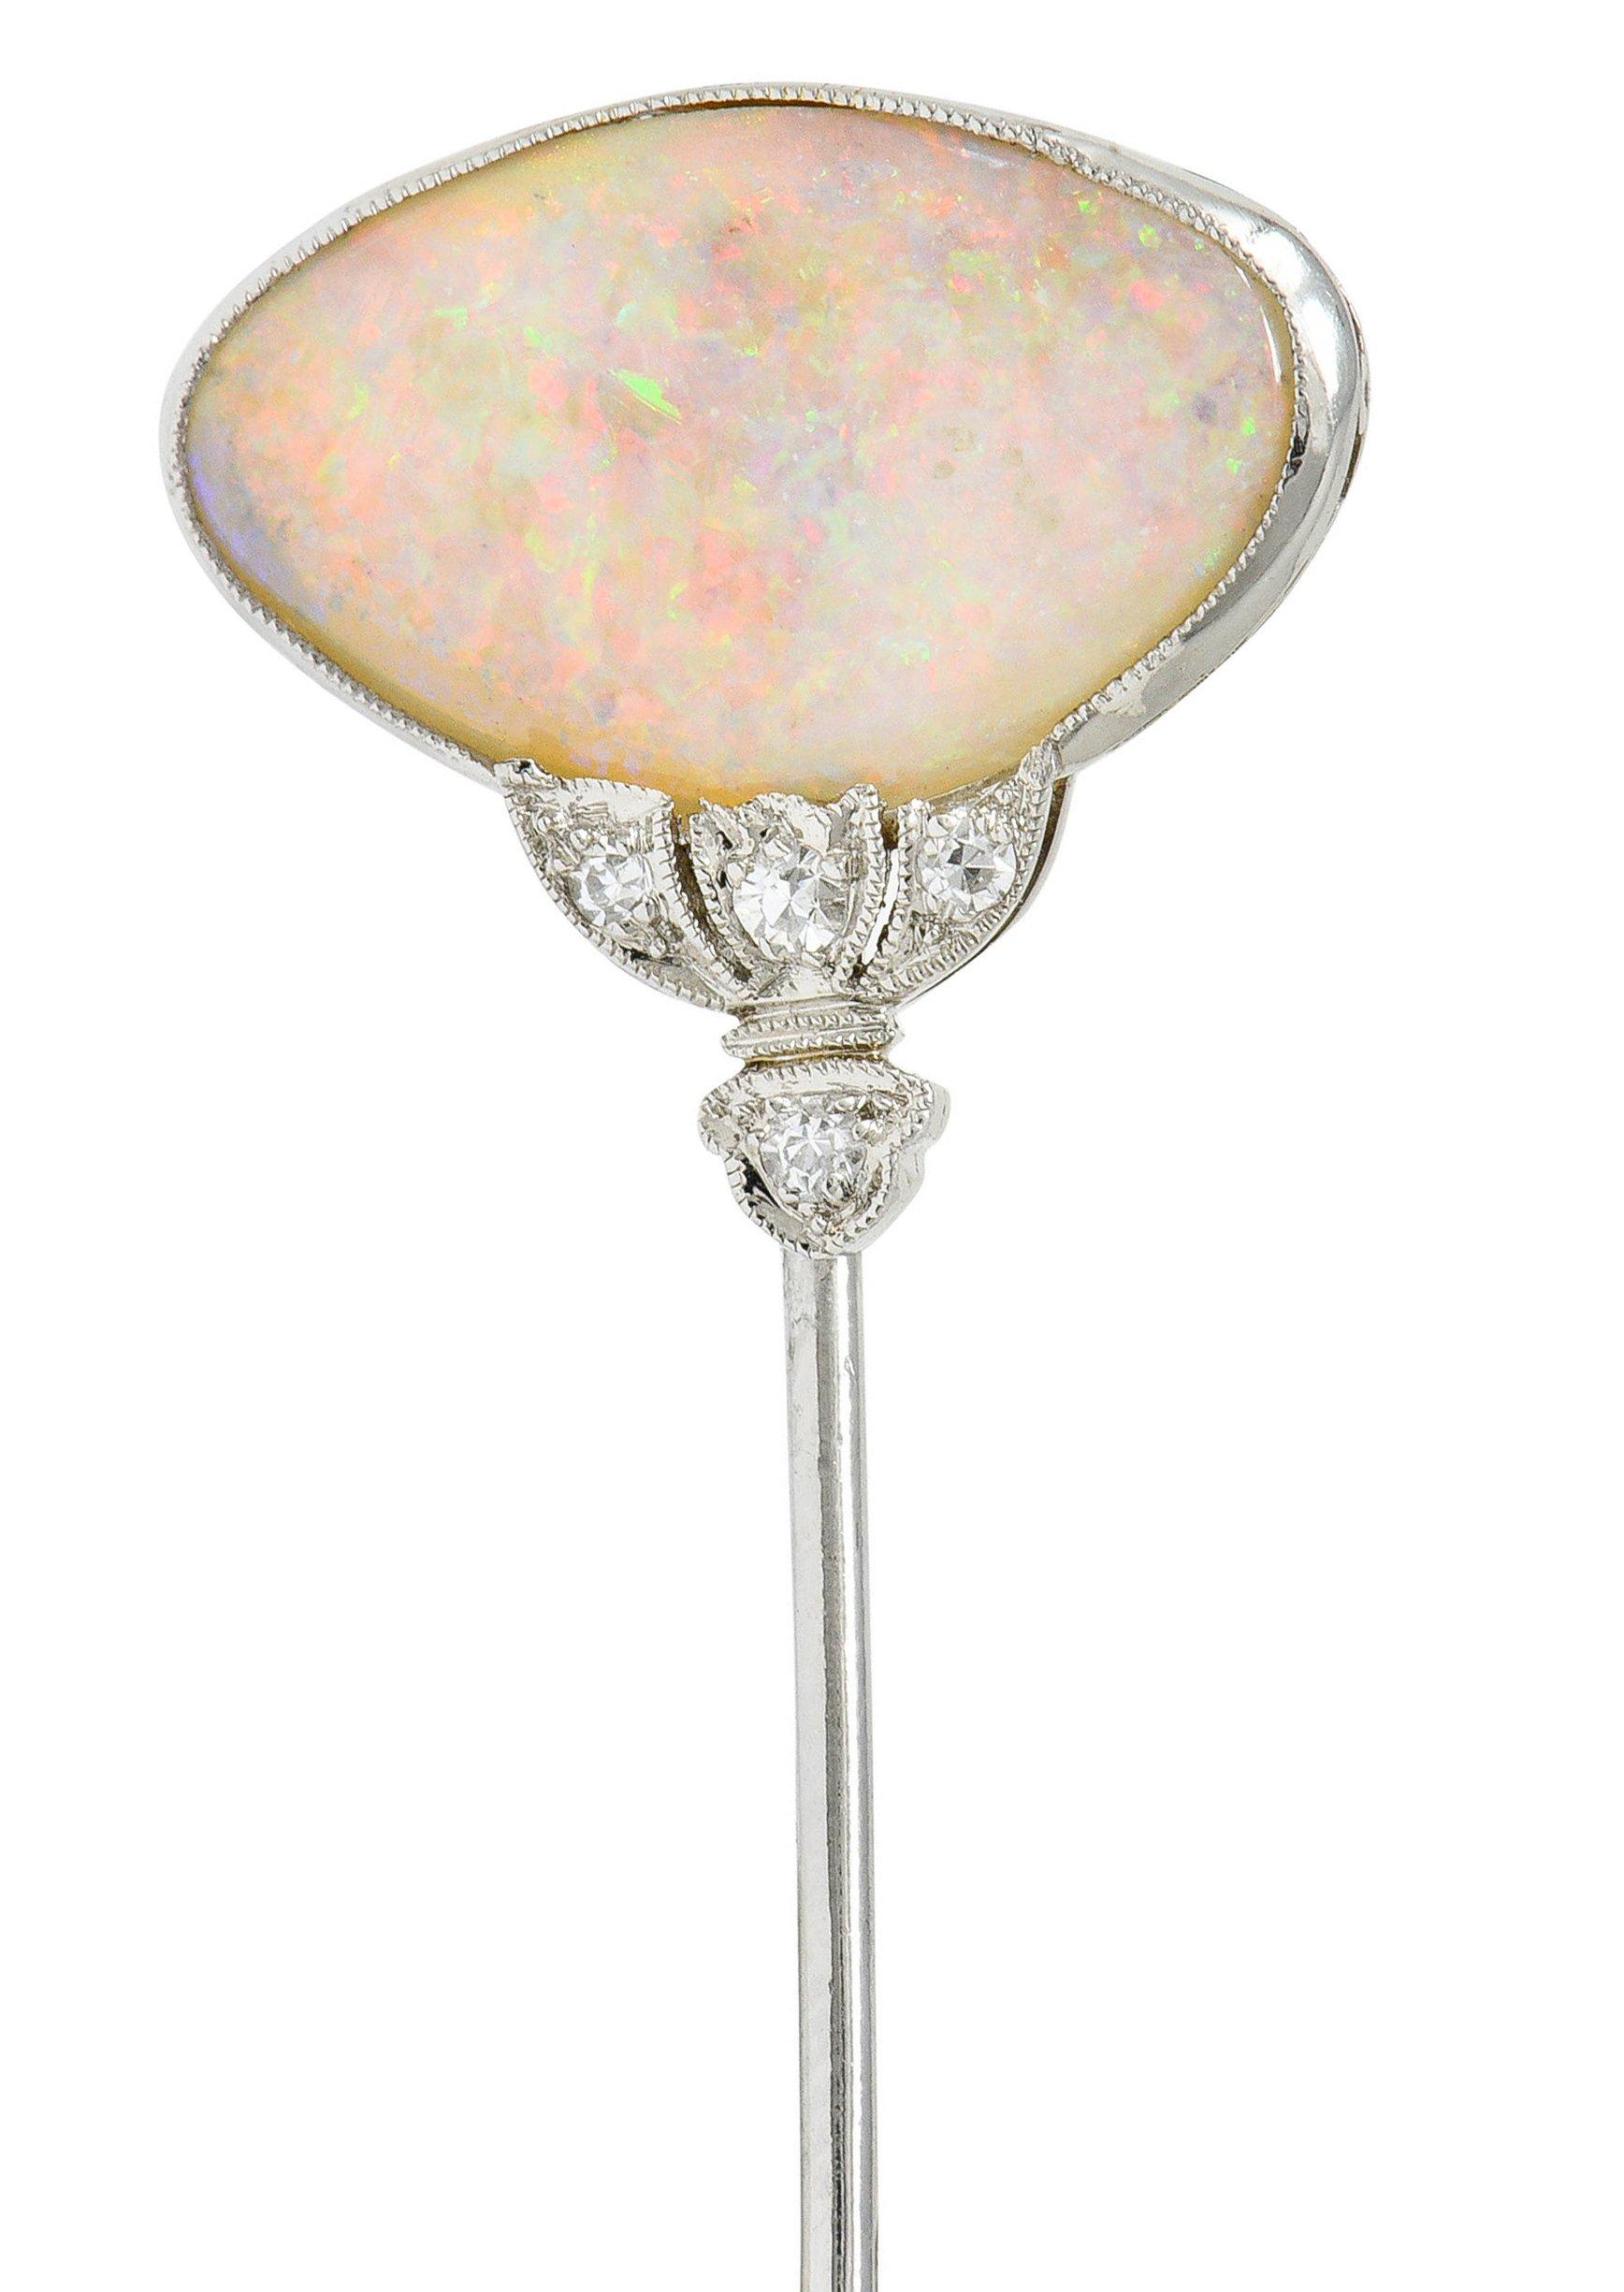 Features an elongated oval cabochon of opal measuring approximately 17.5 x 11.0 mm

Translucent white in body color with very strong spectral pinfire play-of-color

Bezel set in a milgrain surround with a stylized lotus base

Accented by single cut